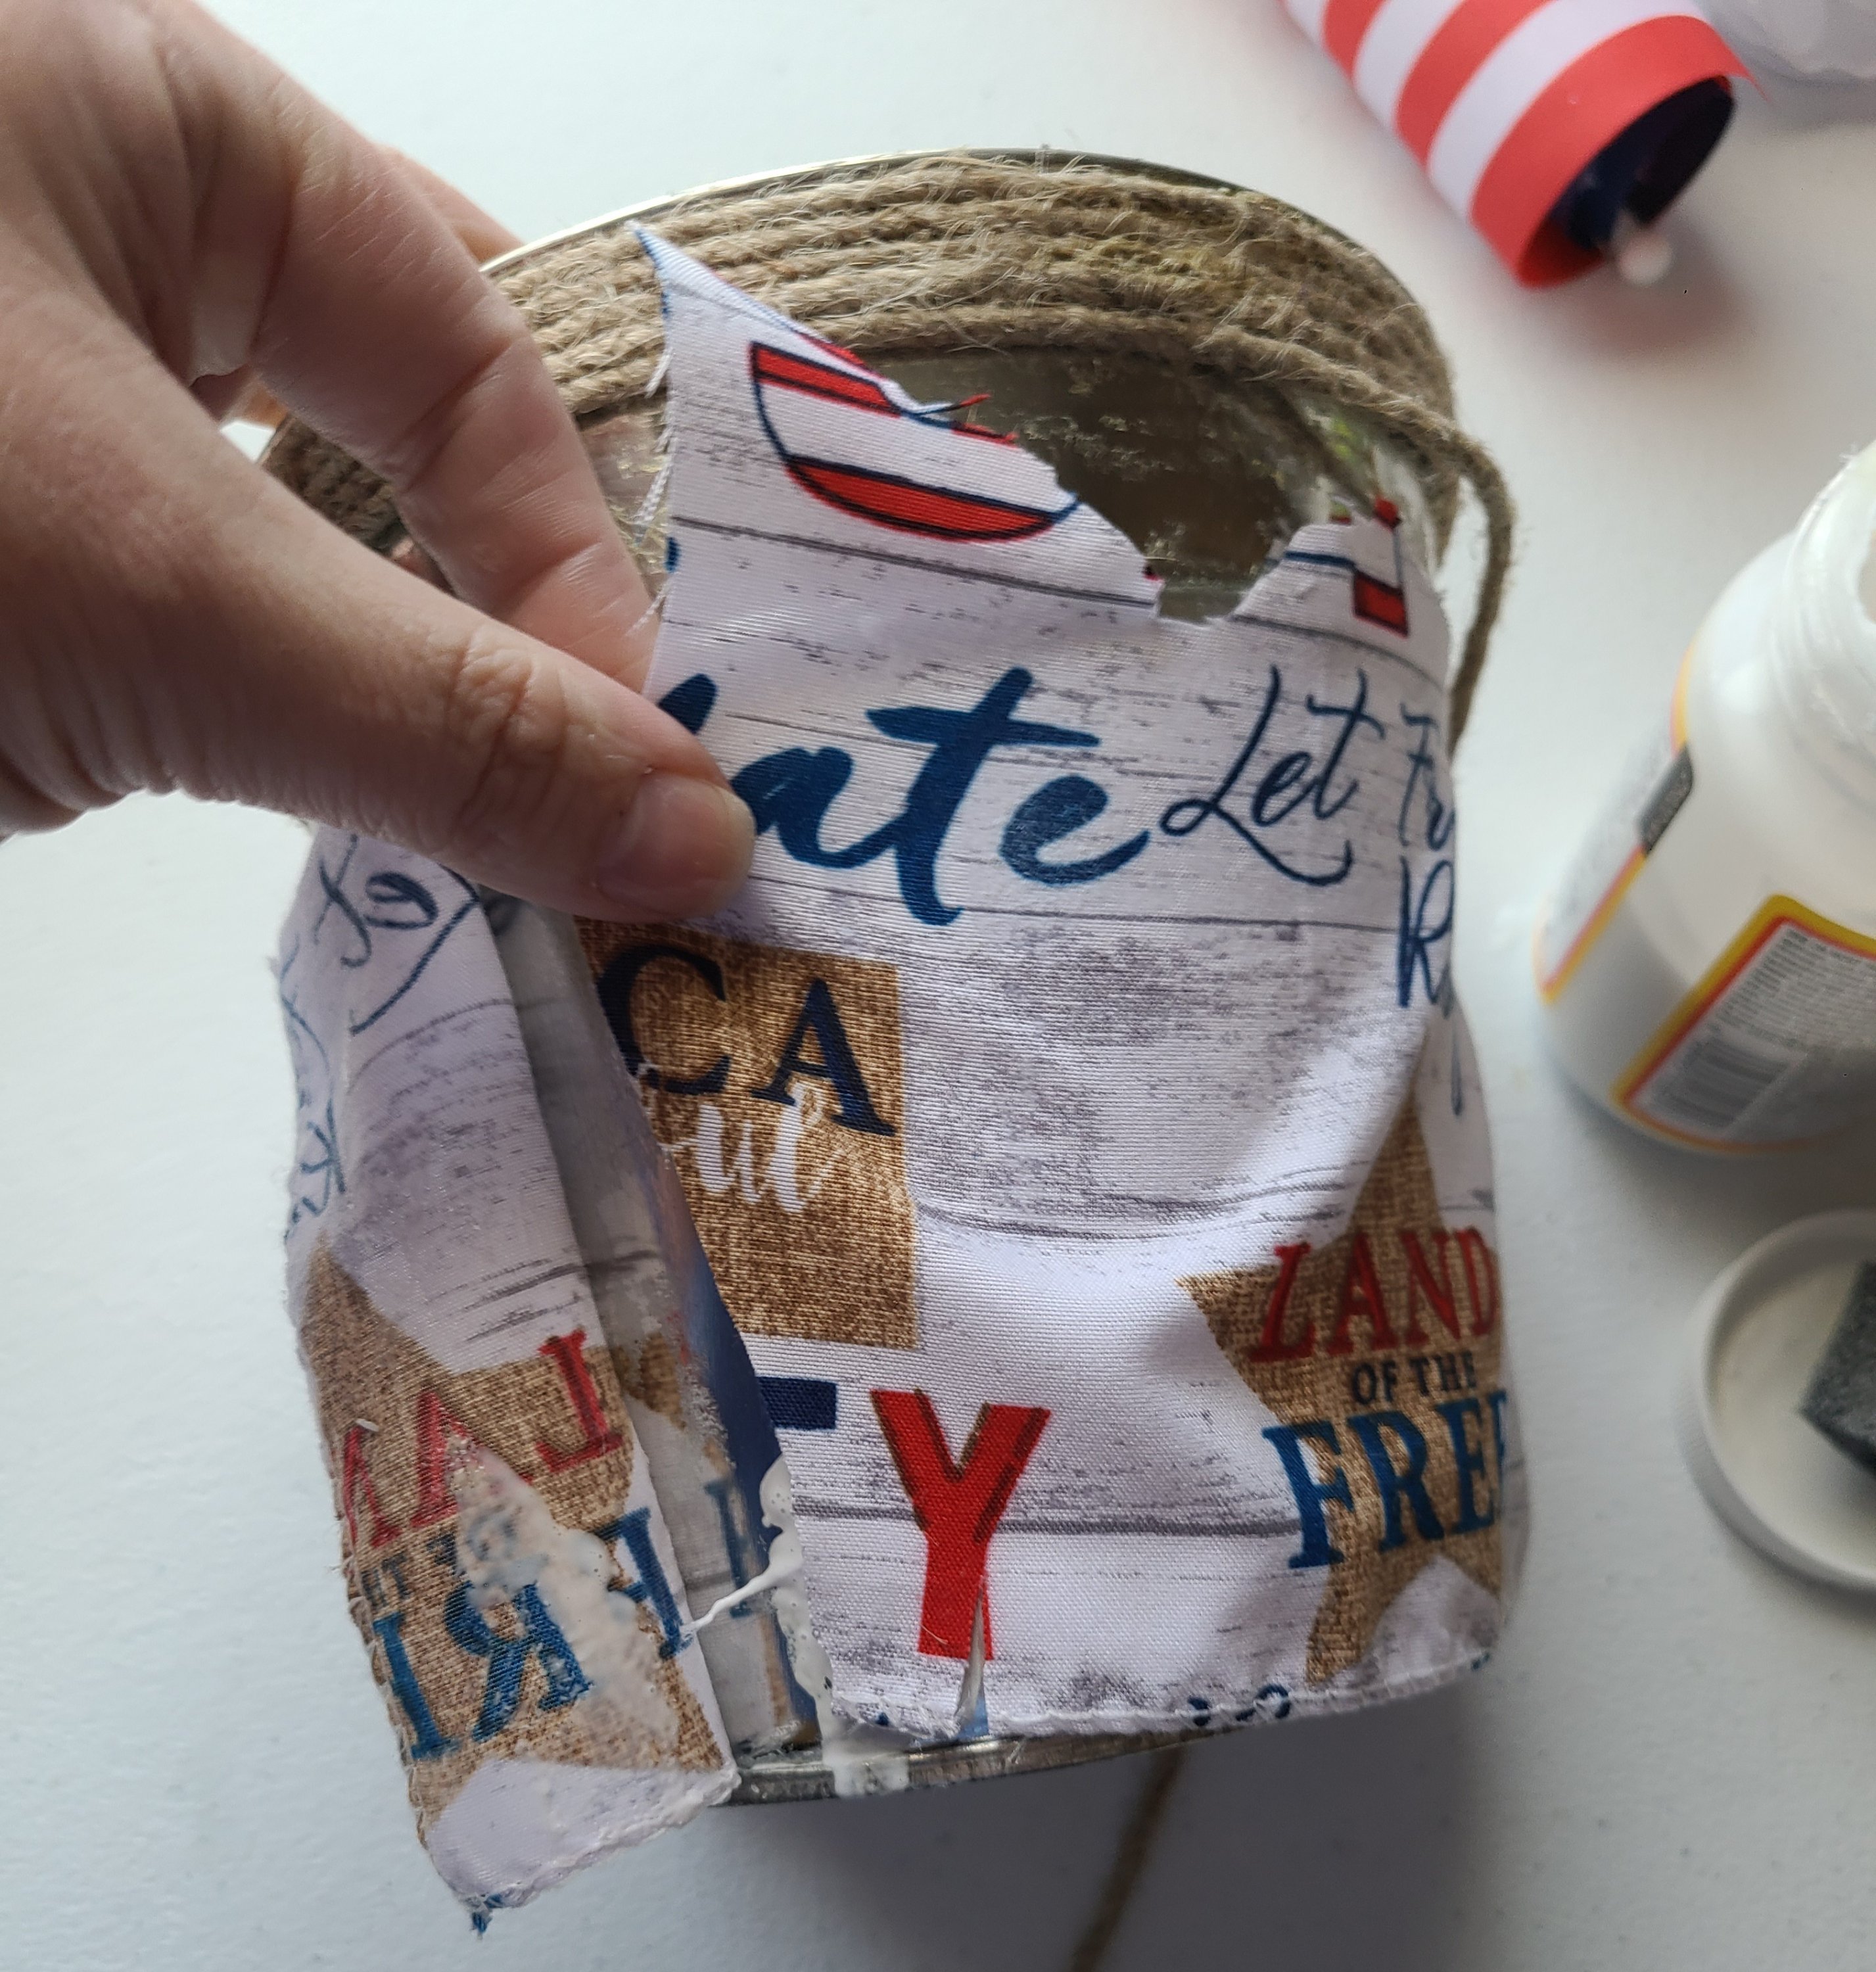 Adding farmhouse style red, white, and blue fabric onto the flowerpot.